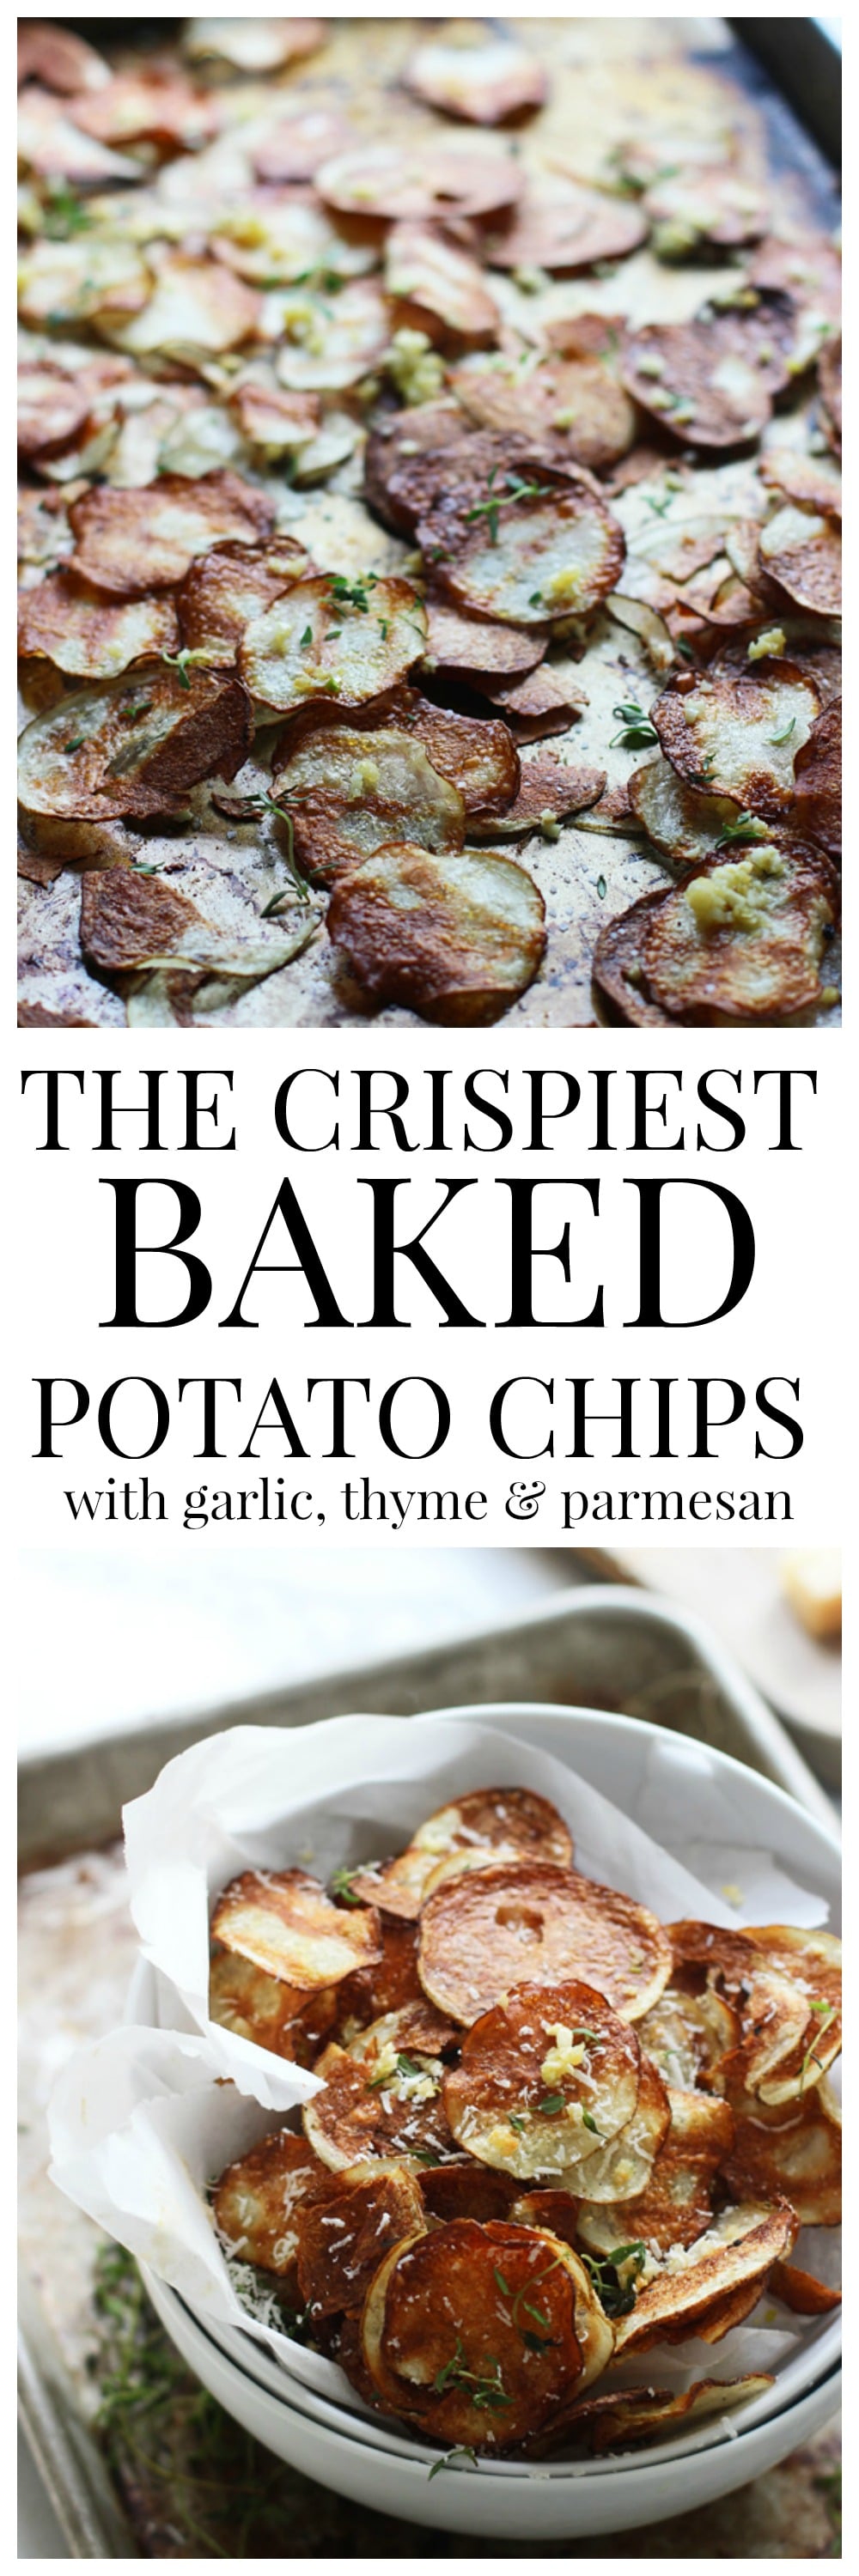 Crispy Baked Potato Chips with Garlic, Thyme and Parmesan